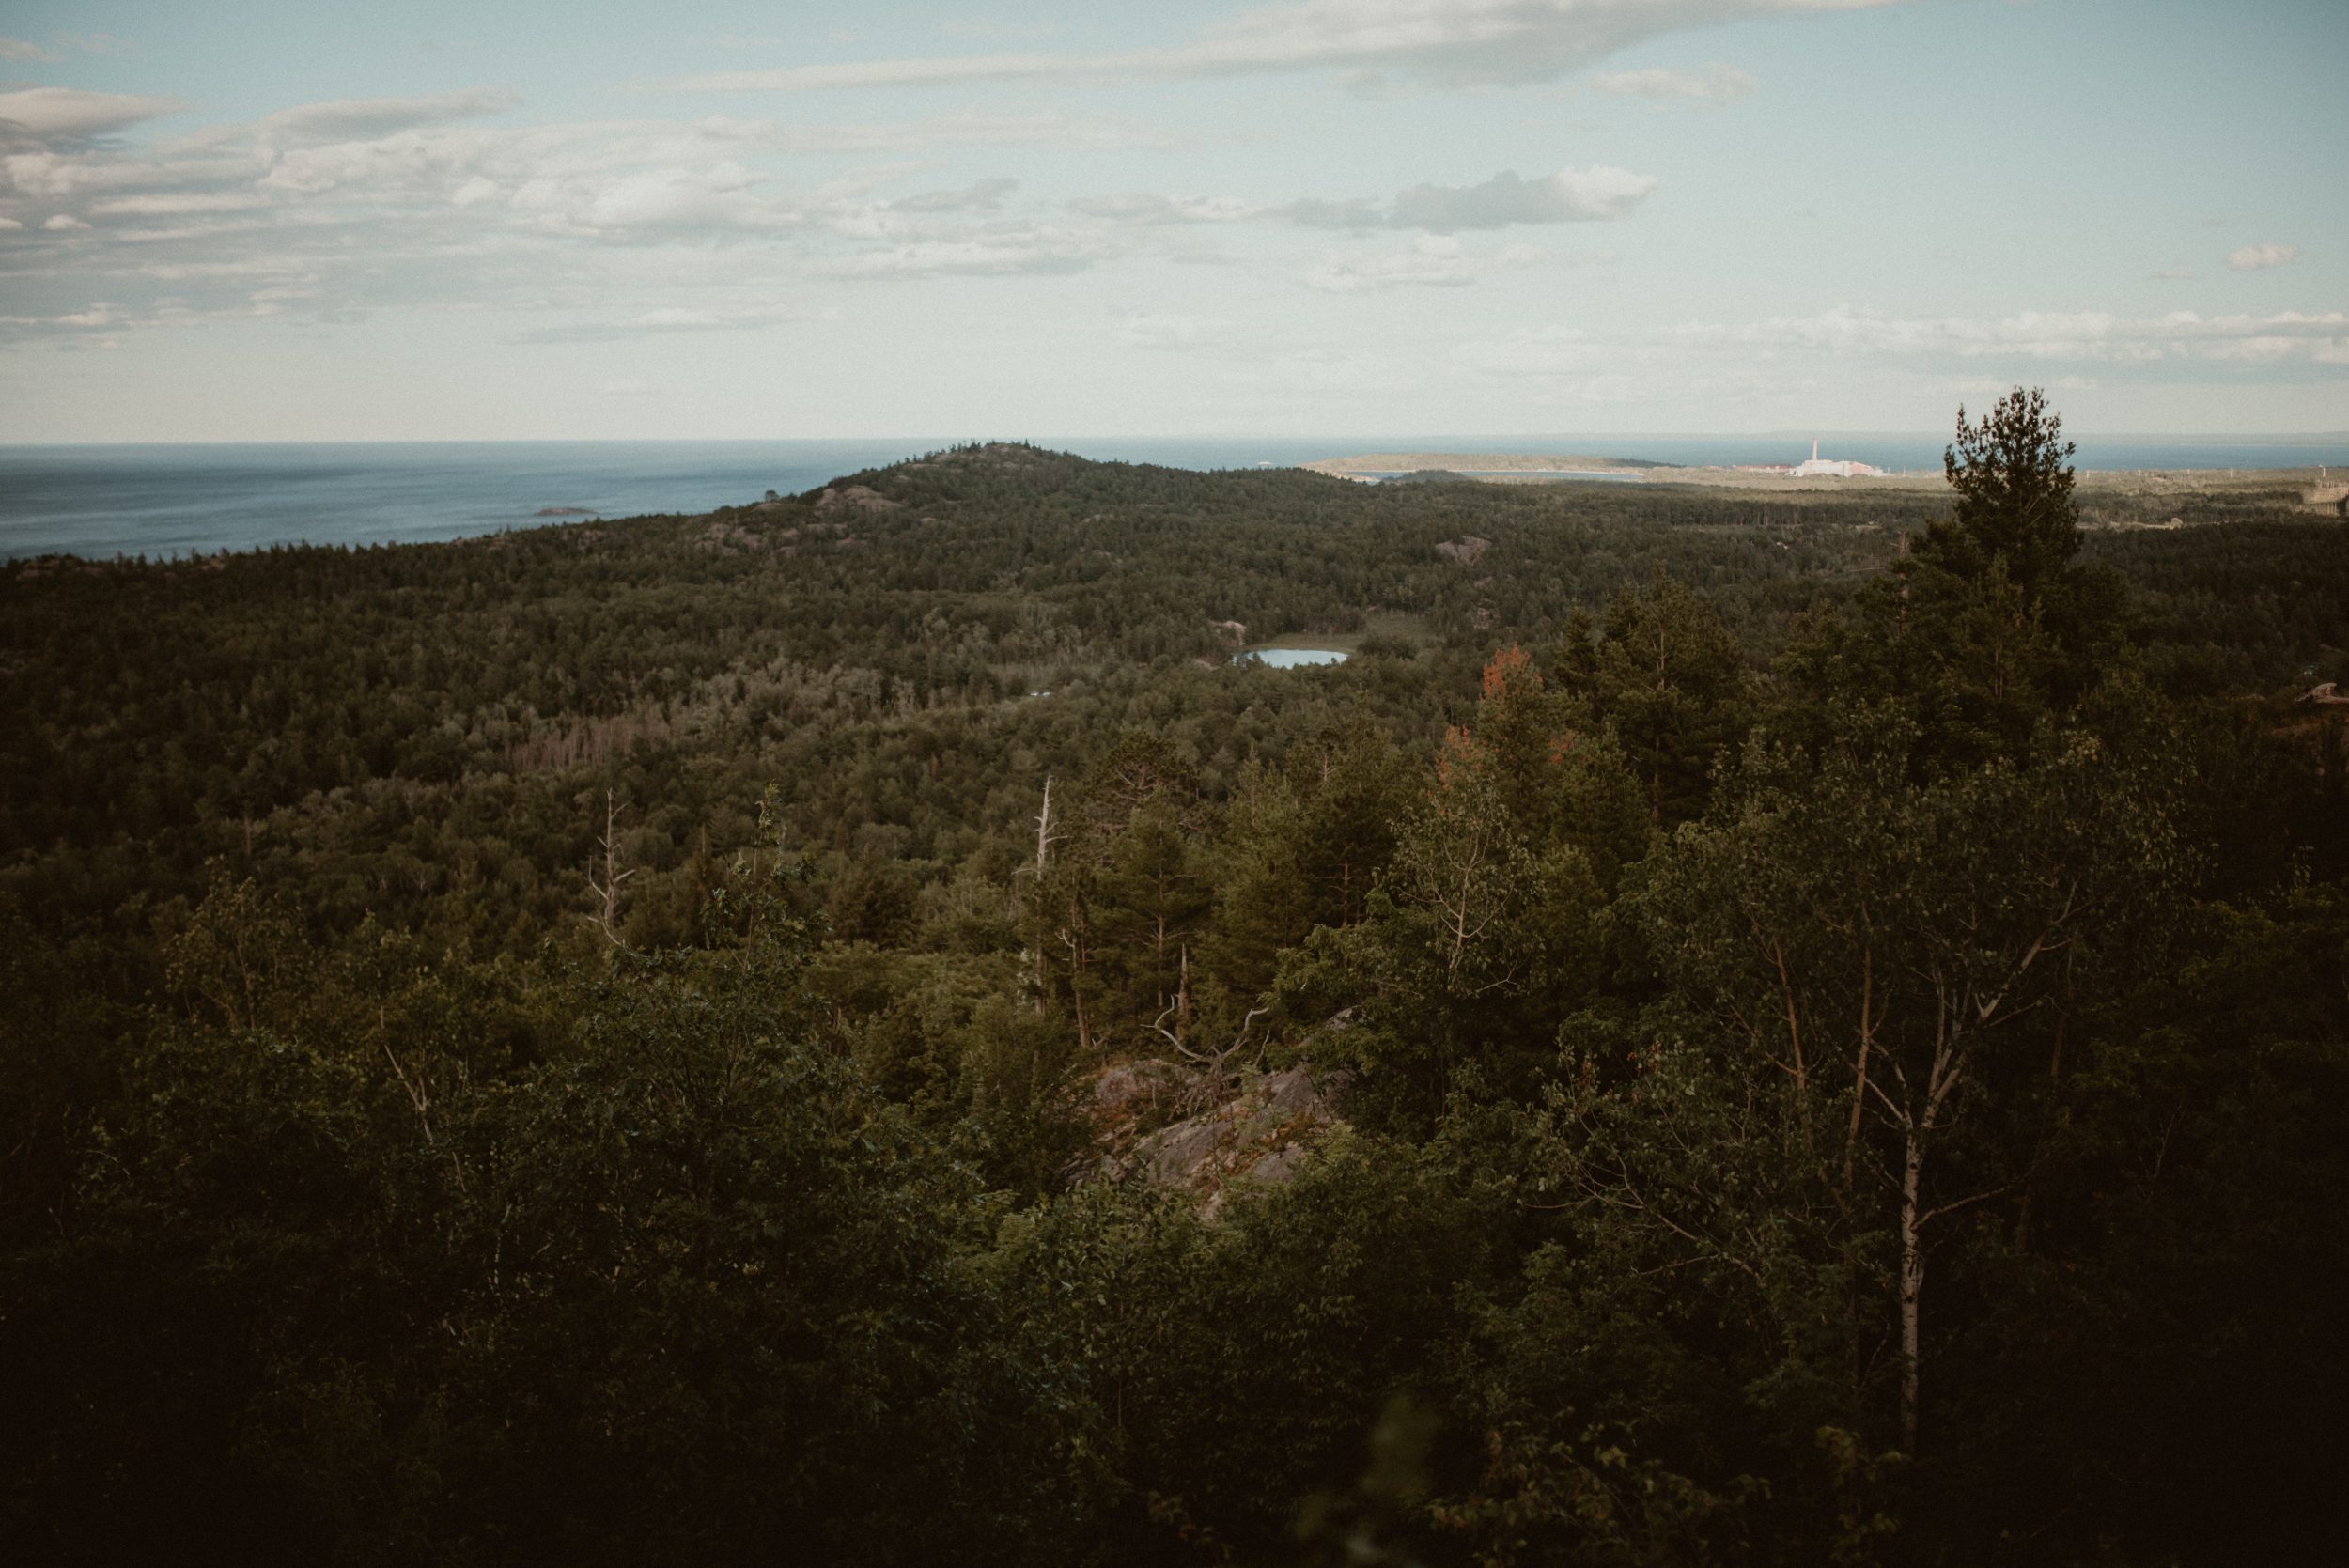 View from the top of Hogback Mountain in Michigan's Upper Peninsula